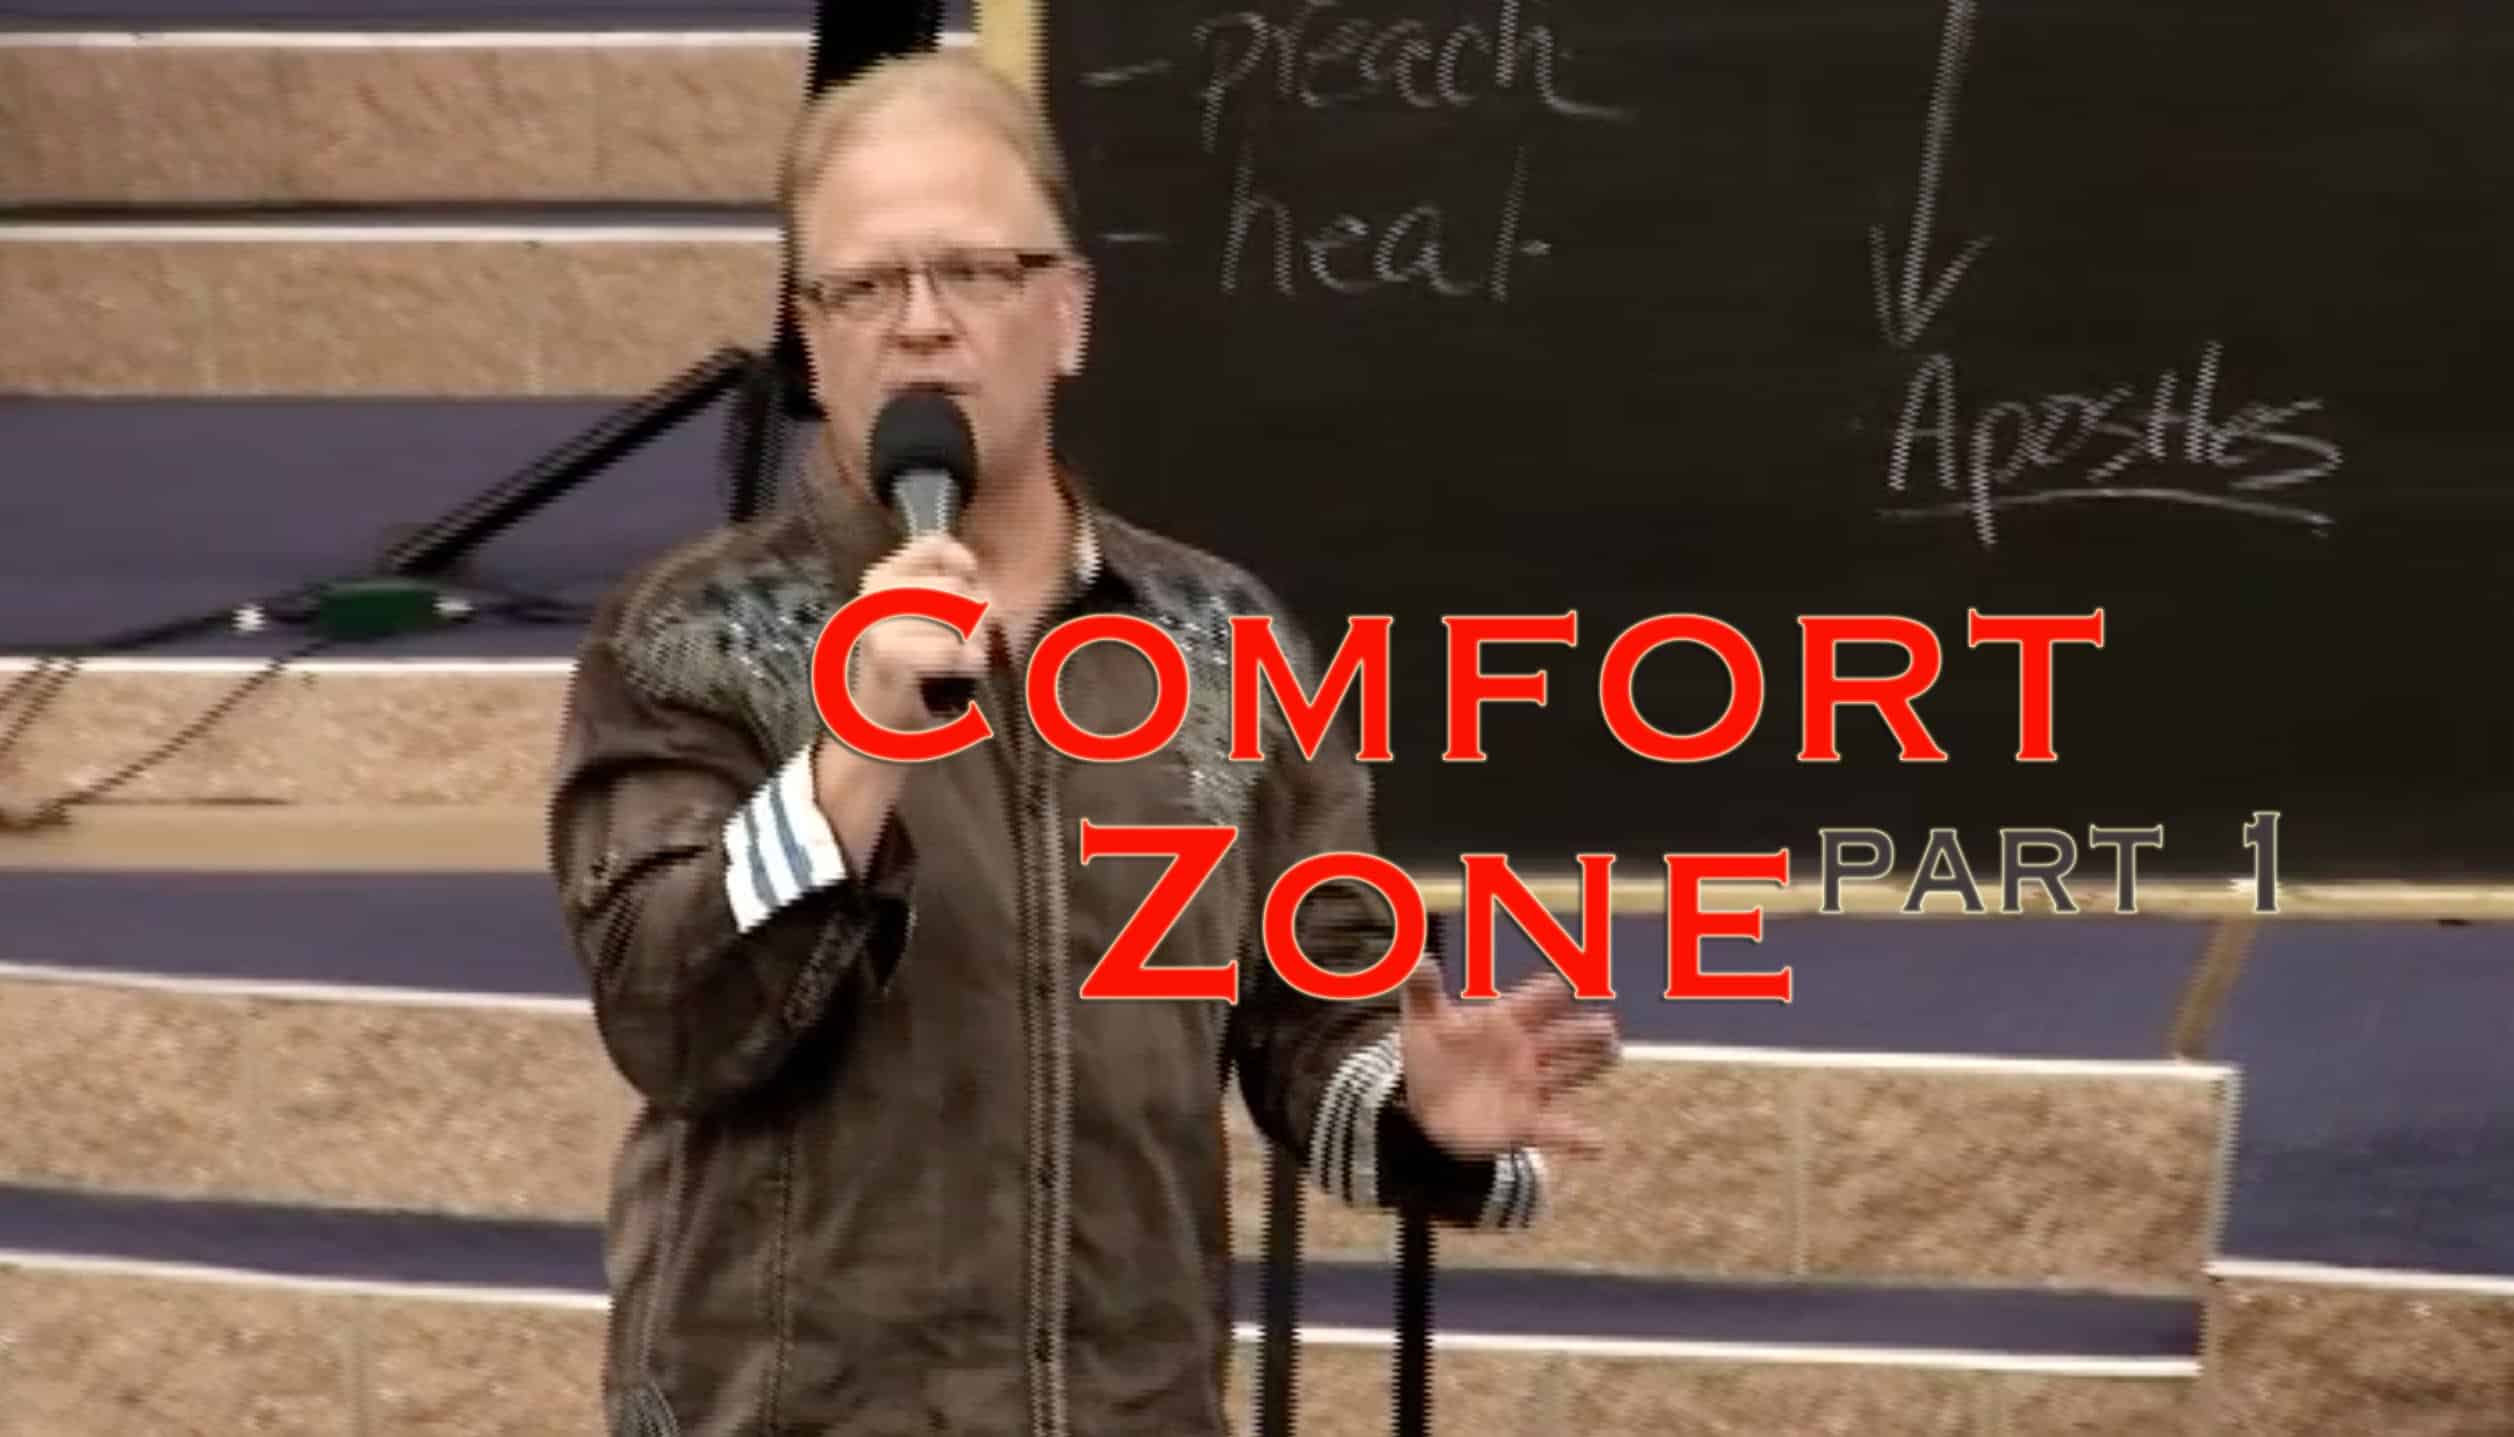 GET OUT OF THE COMFORT ZONE PART 1